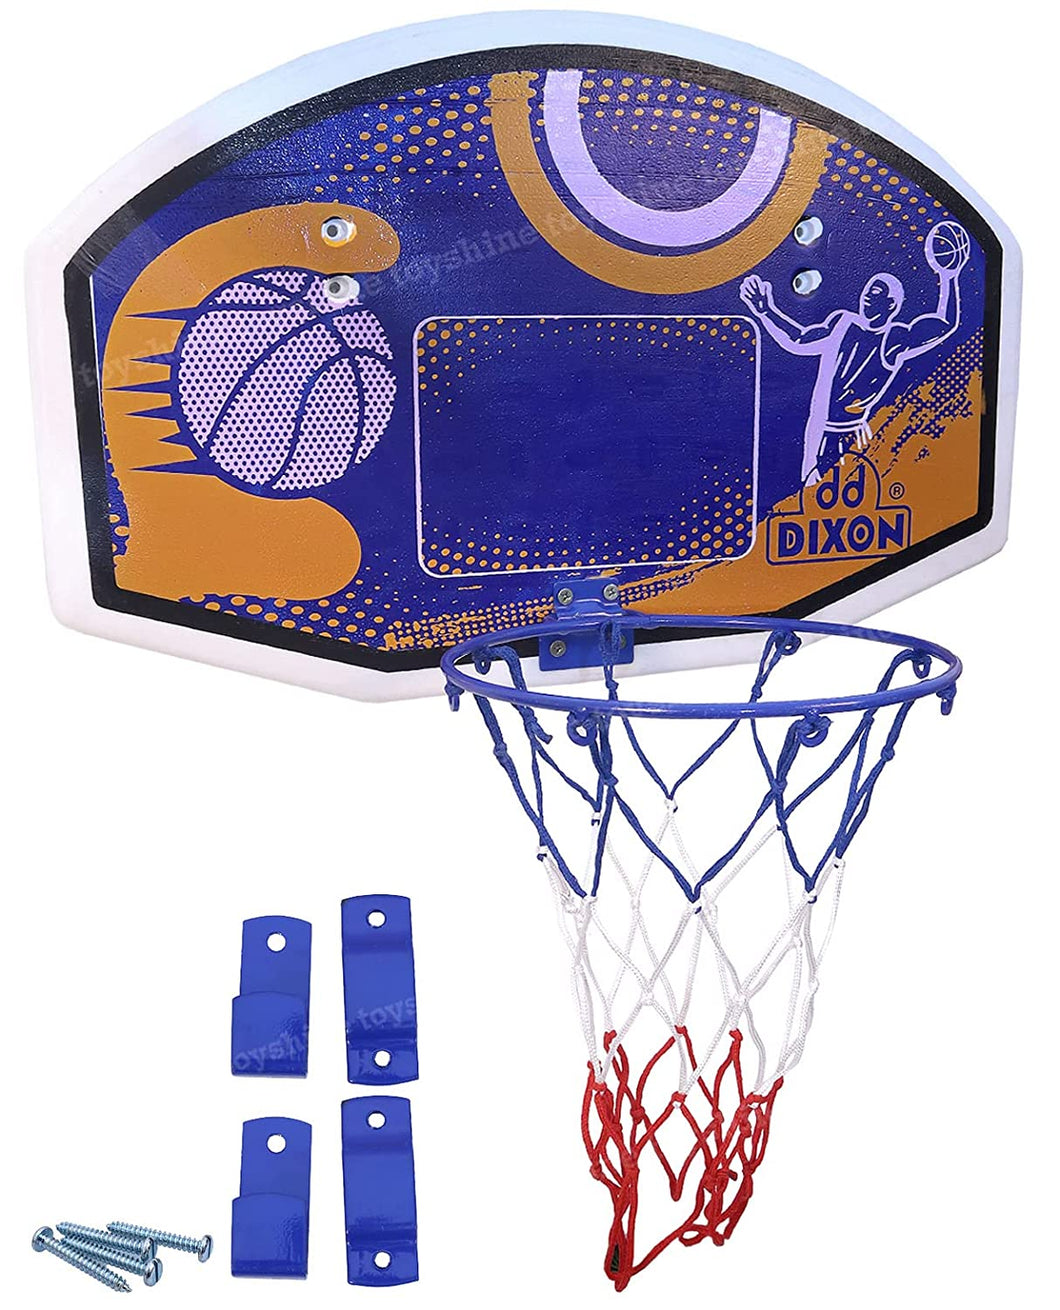 Toyshine Fun and Play Basketball Board and Metal Ring | Indoor Outdoor Game Sports Play for Girls Boys- Large